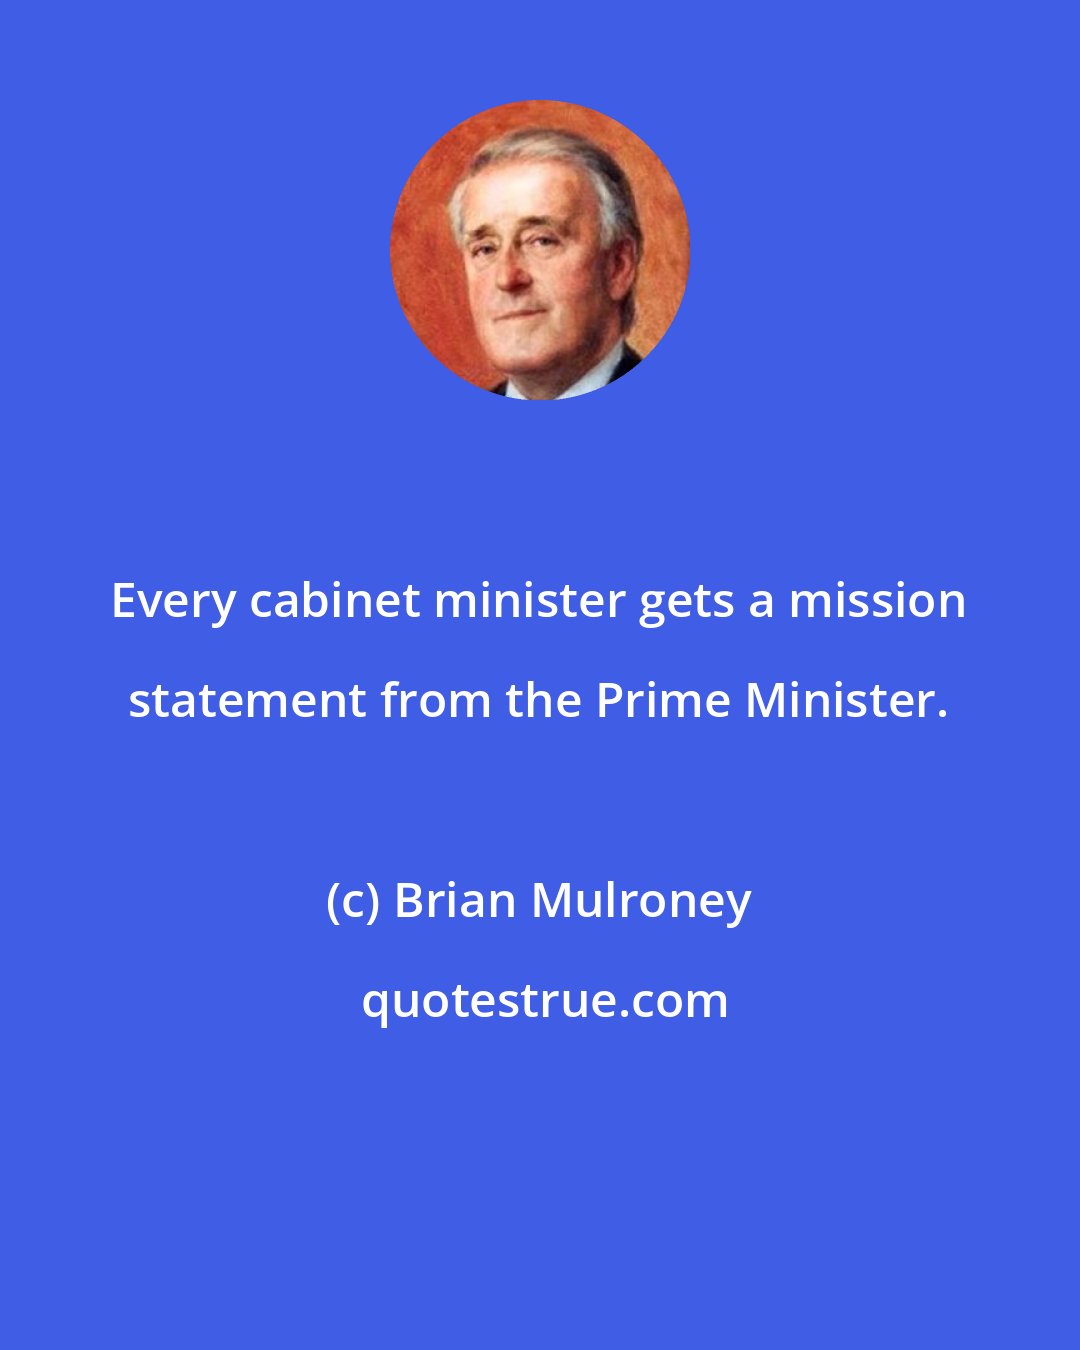 Brian Mulroney: Every cabinet minister gets a mission statement from the Prime Minister.